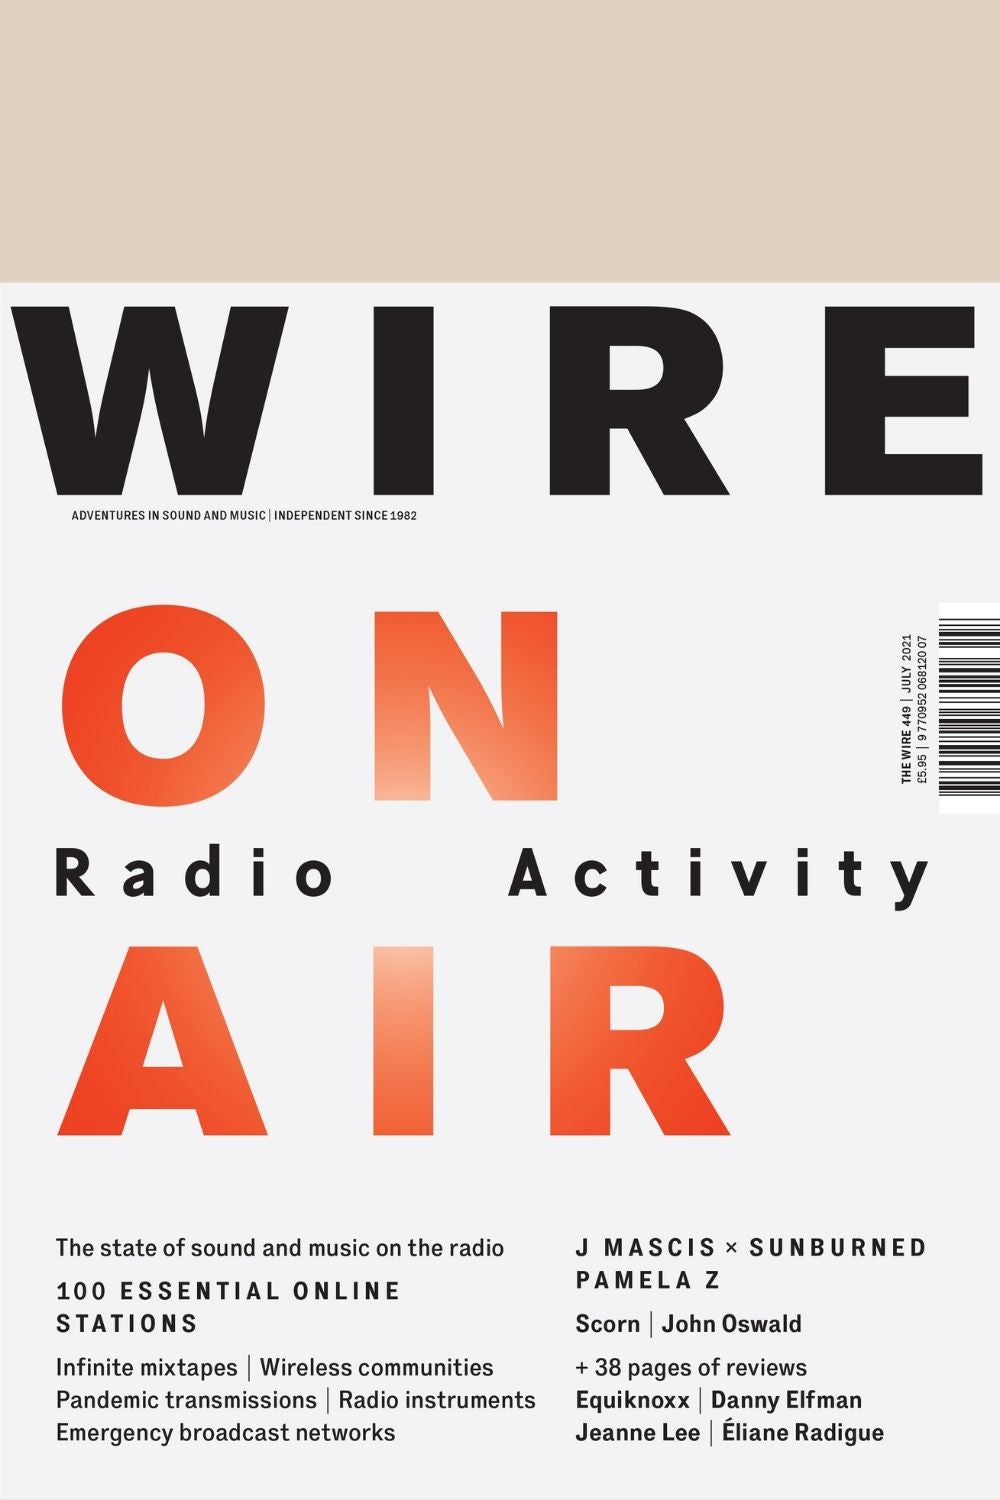 Front cover of The Wire Issue 449